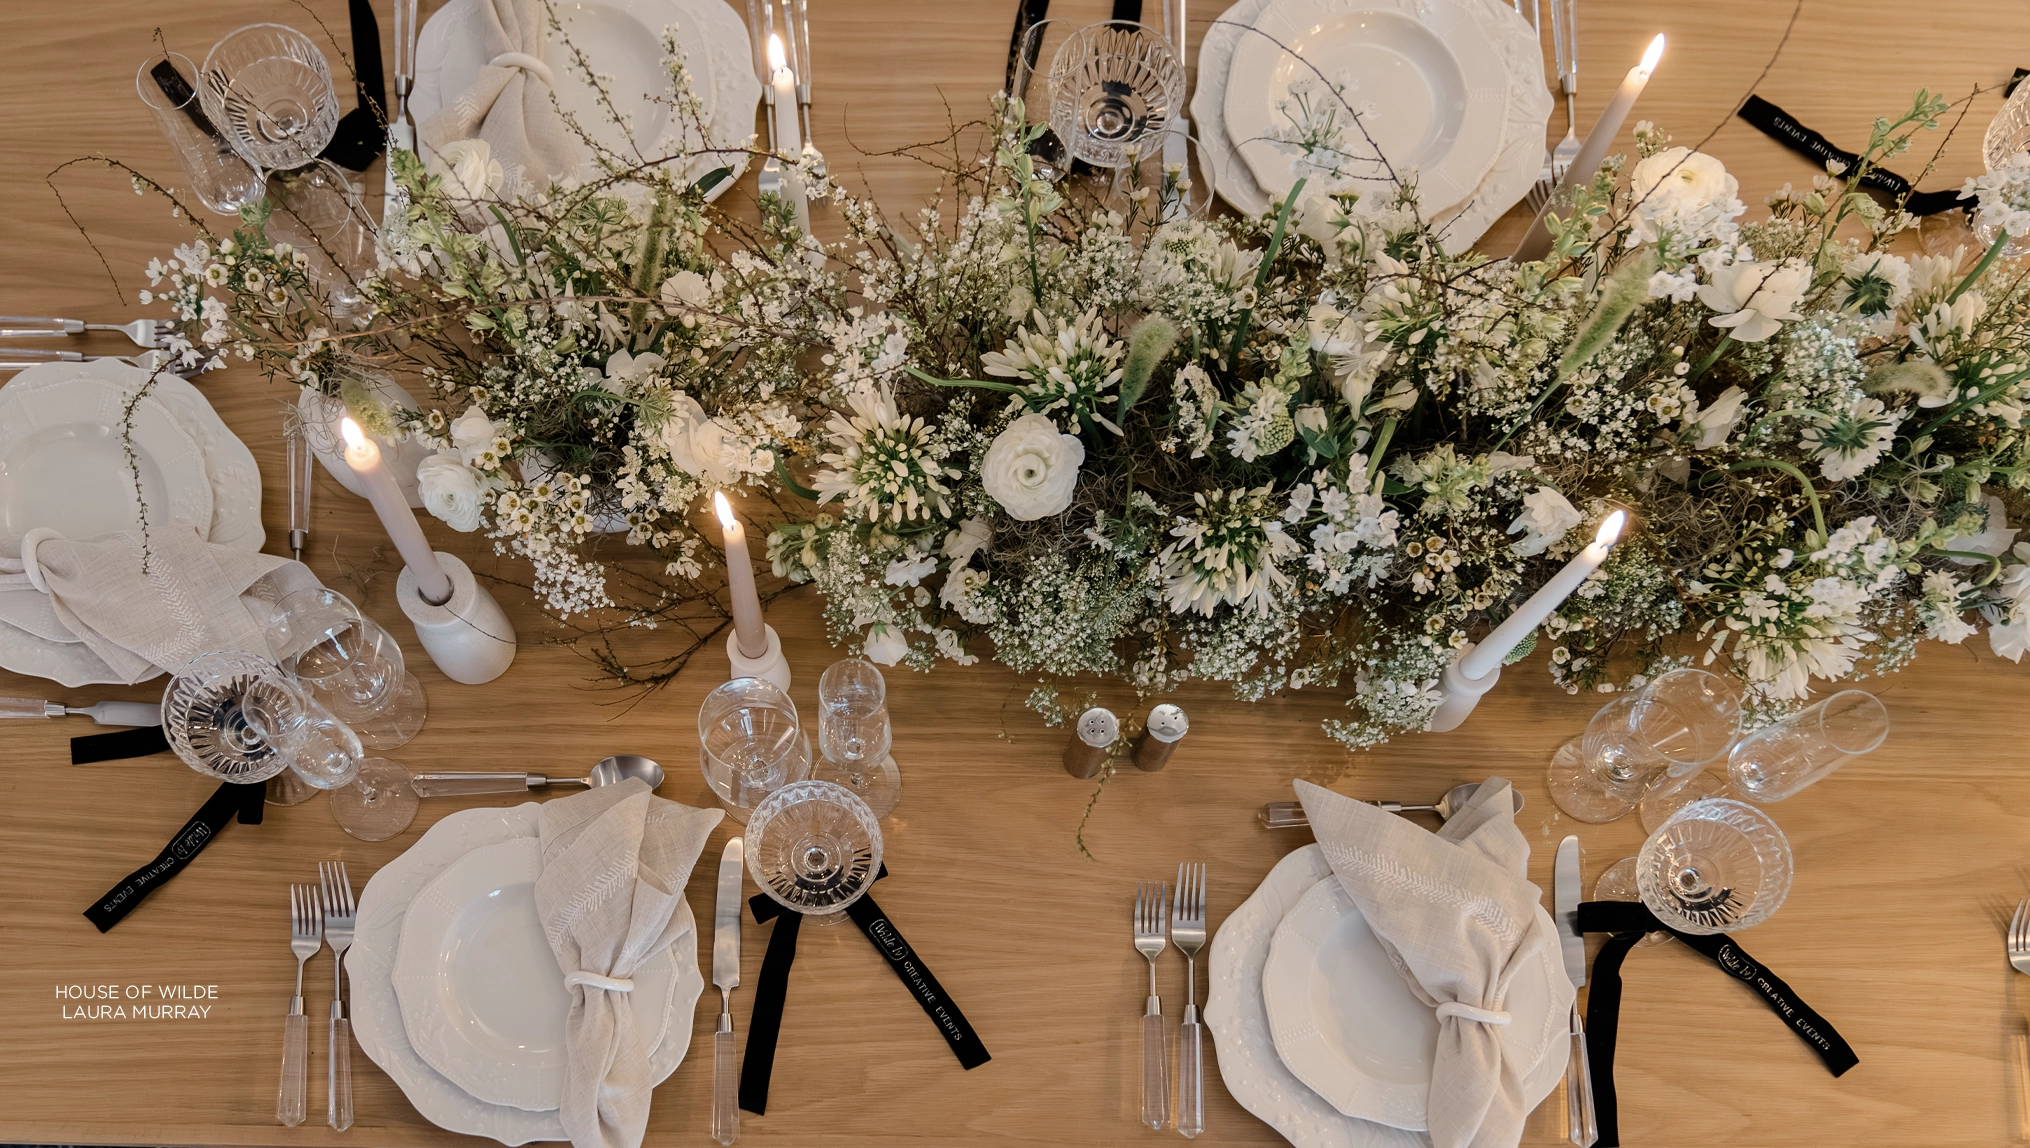 Elegant dining table setting with white florals, candles, and a rustic wooden table for a reverie social gathering.